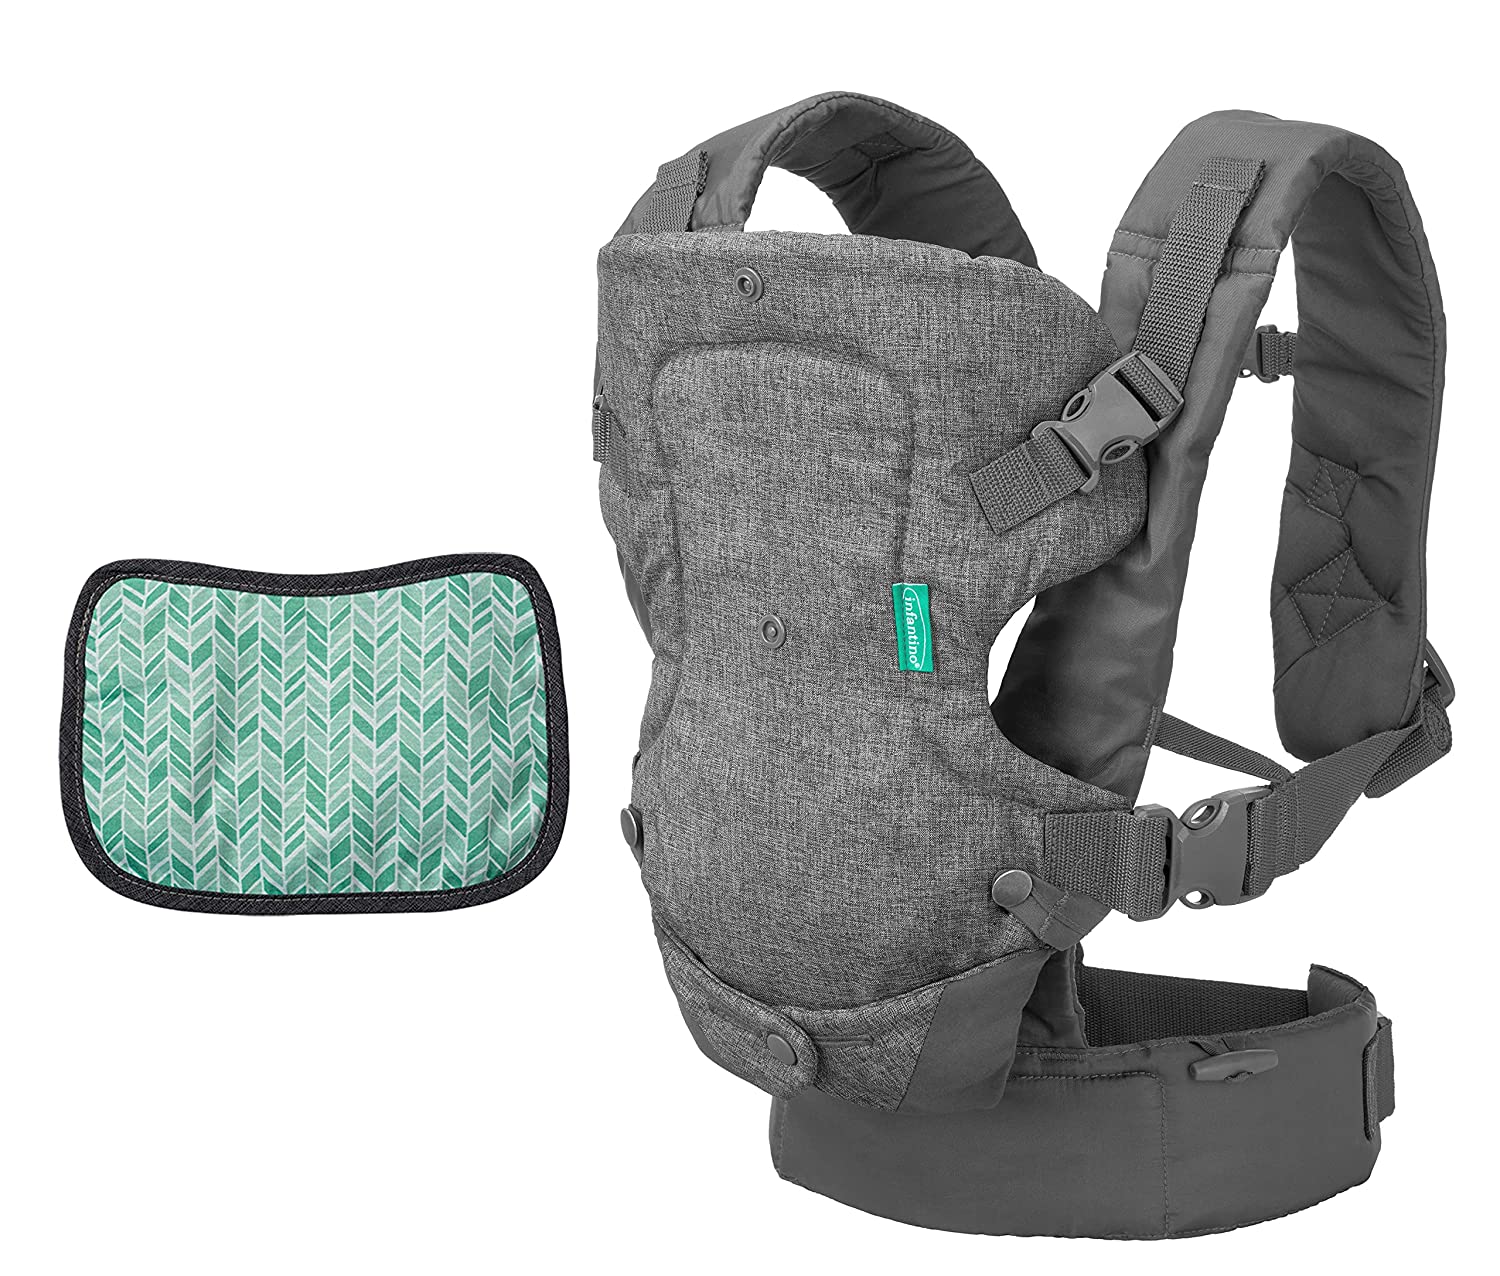 Infantino Flip Advanced 4-in-1 Baby Carrier - Ergonomic Baby Carrier with 4 Carrying Positions - For Infants and Toddlers from 3.6 - 14.5 kg